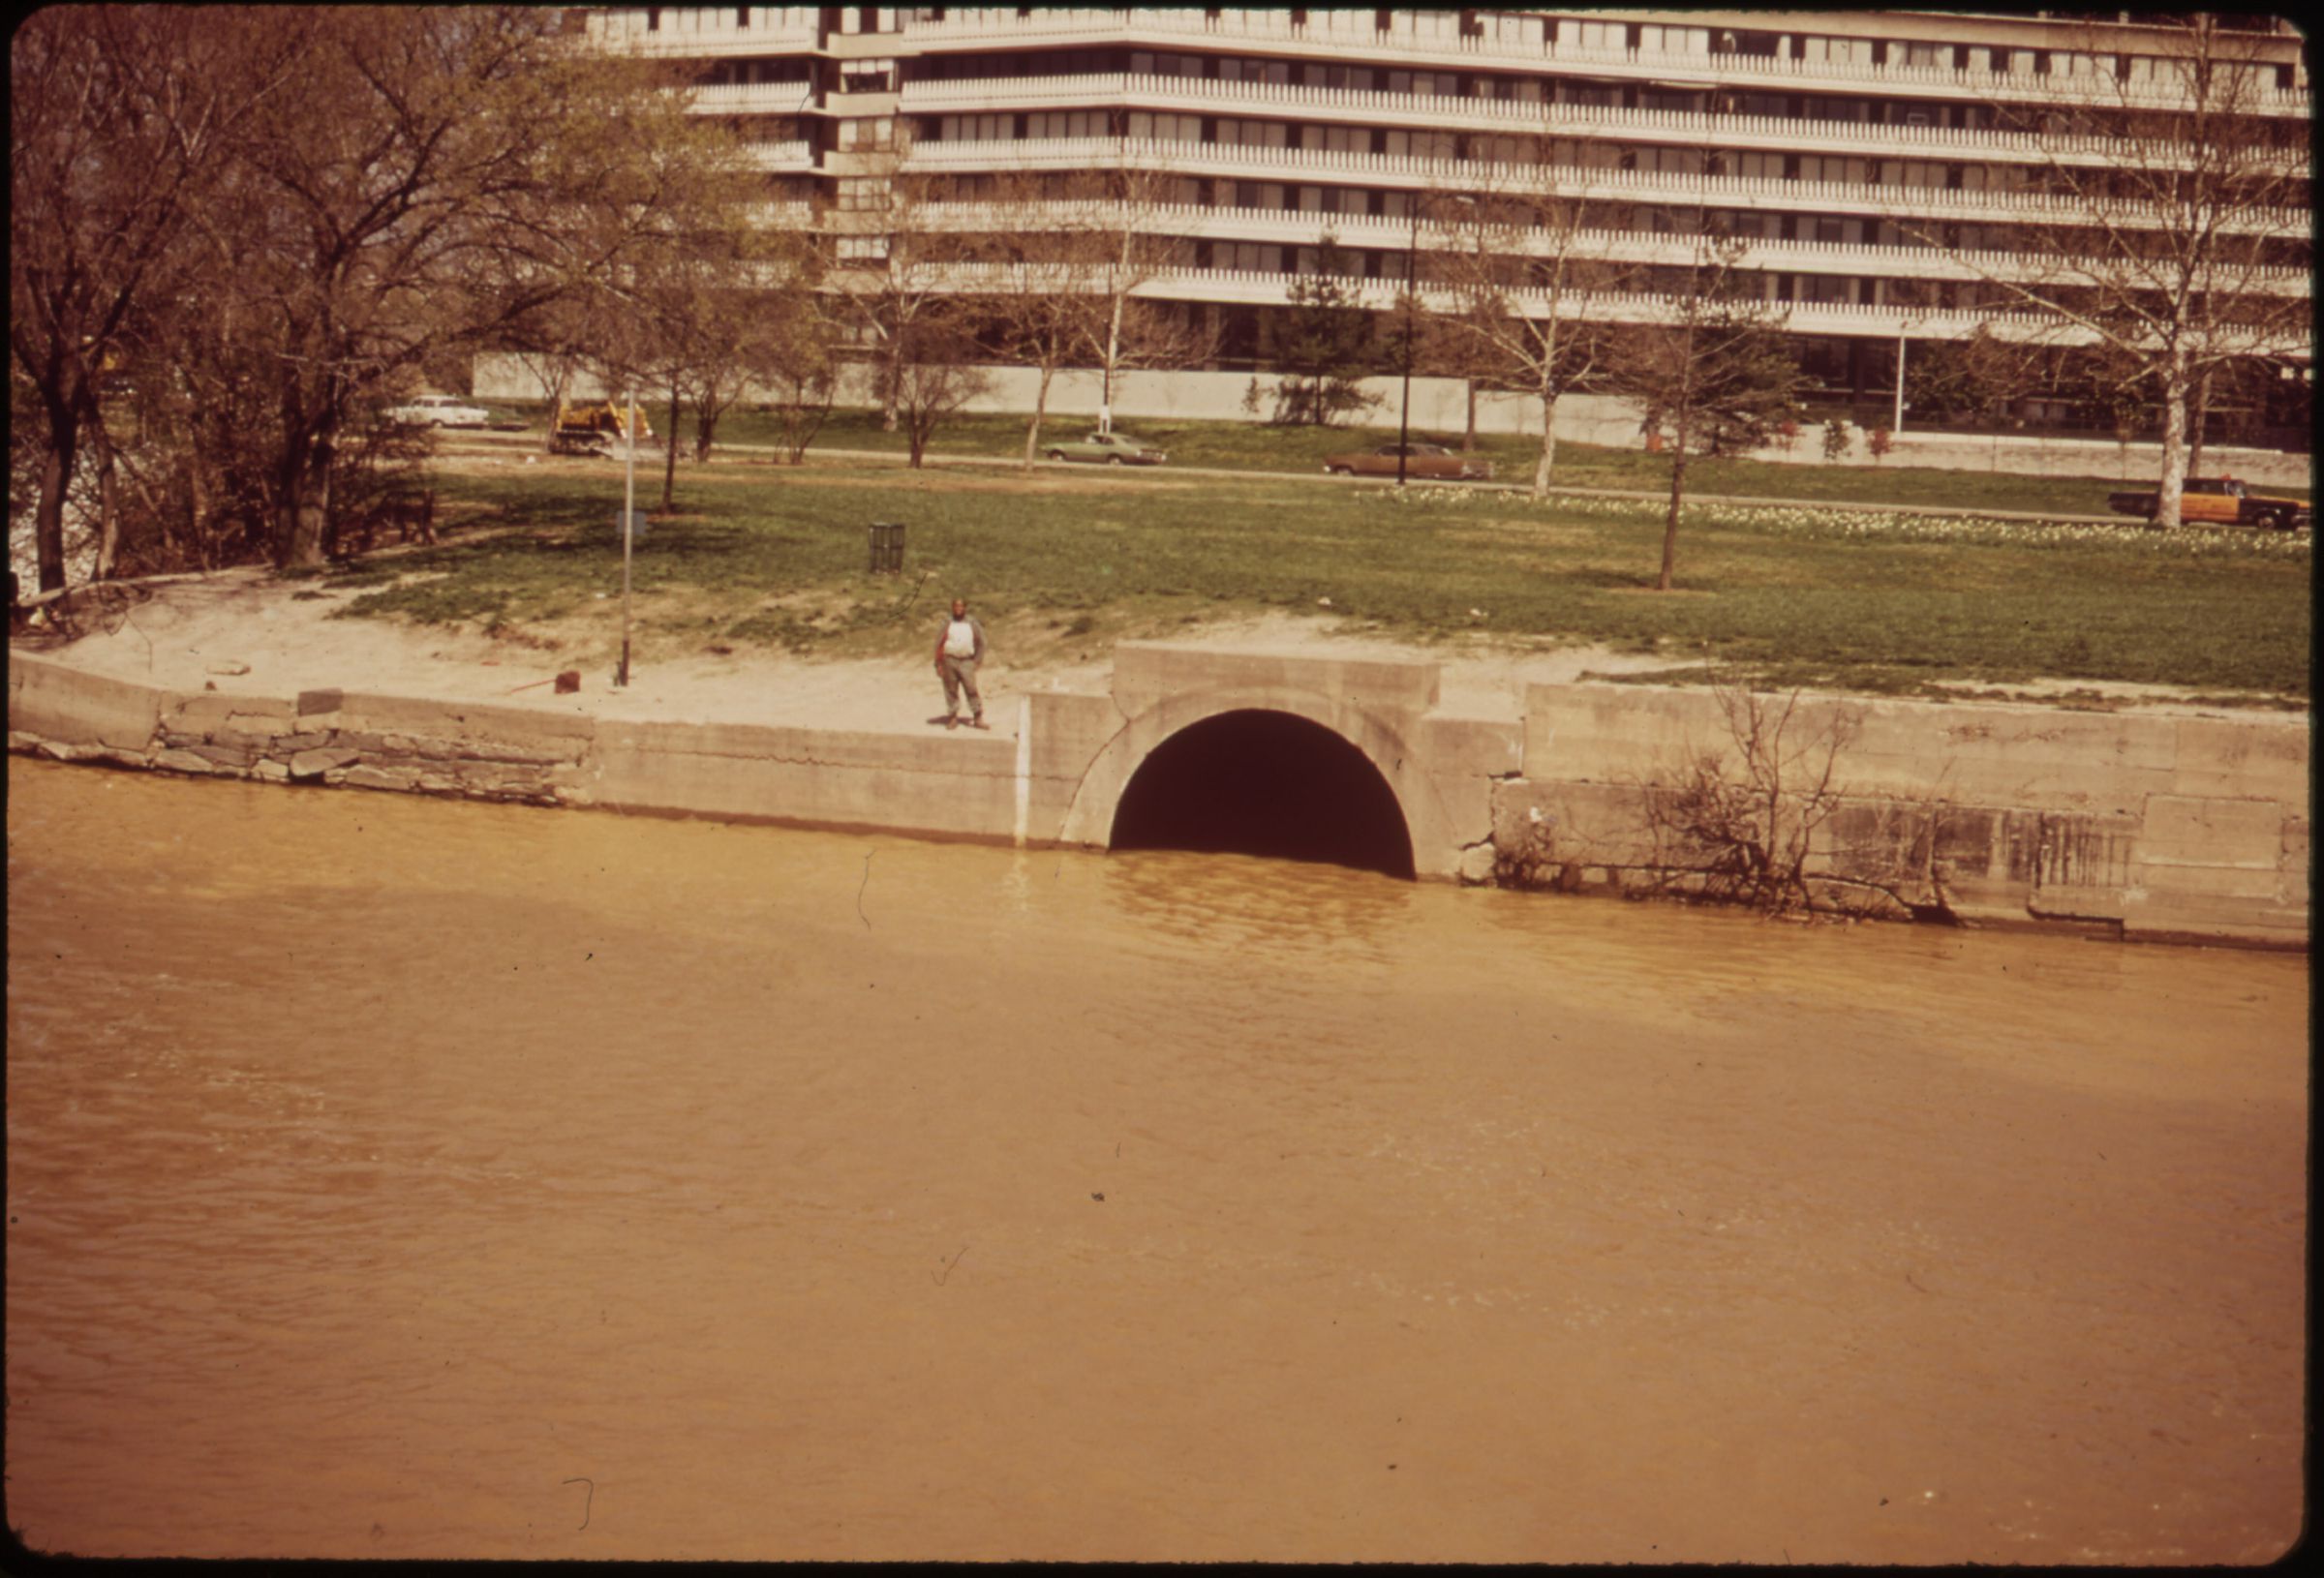 Raw sewage flows into the Potomac River in Washington, DC, in 1973.